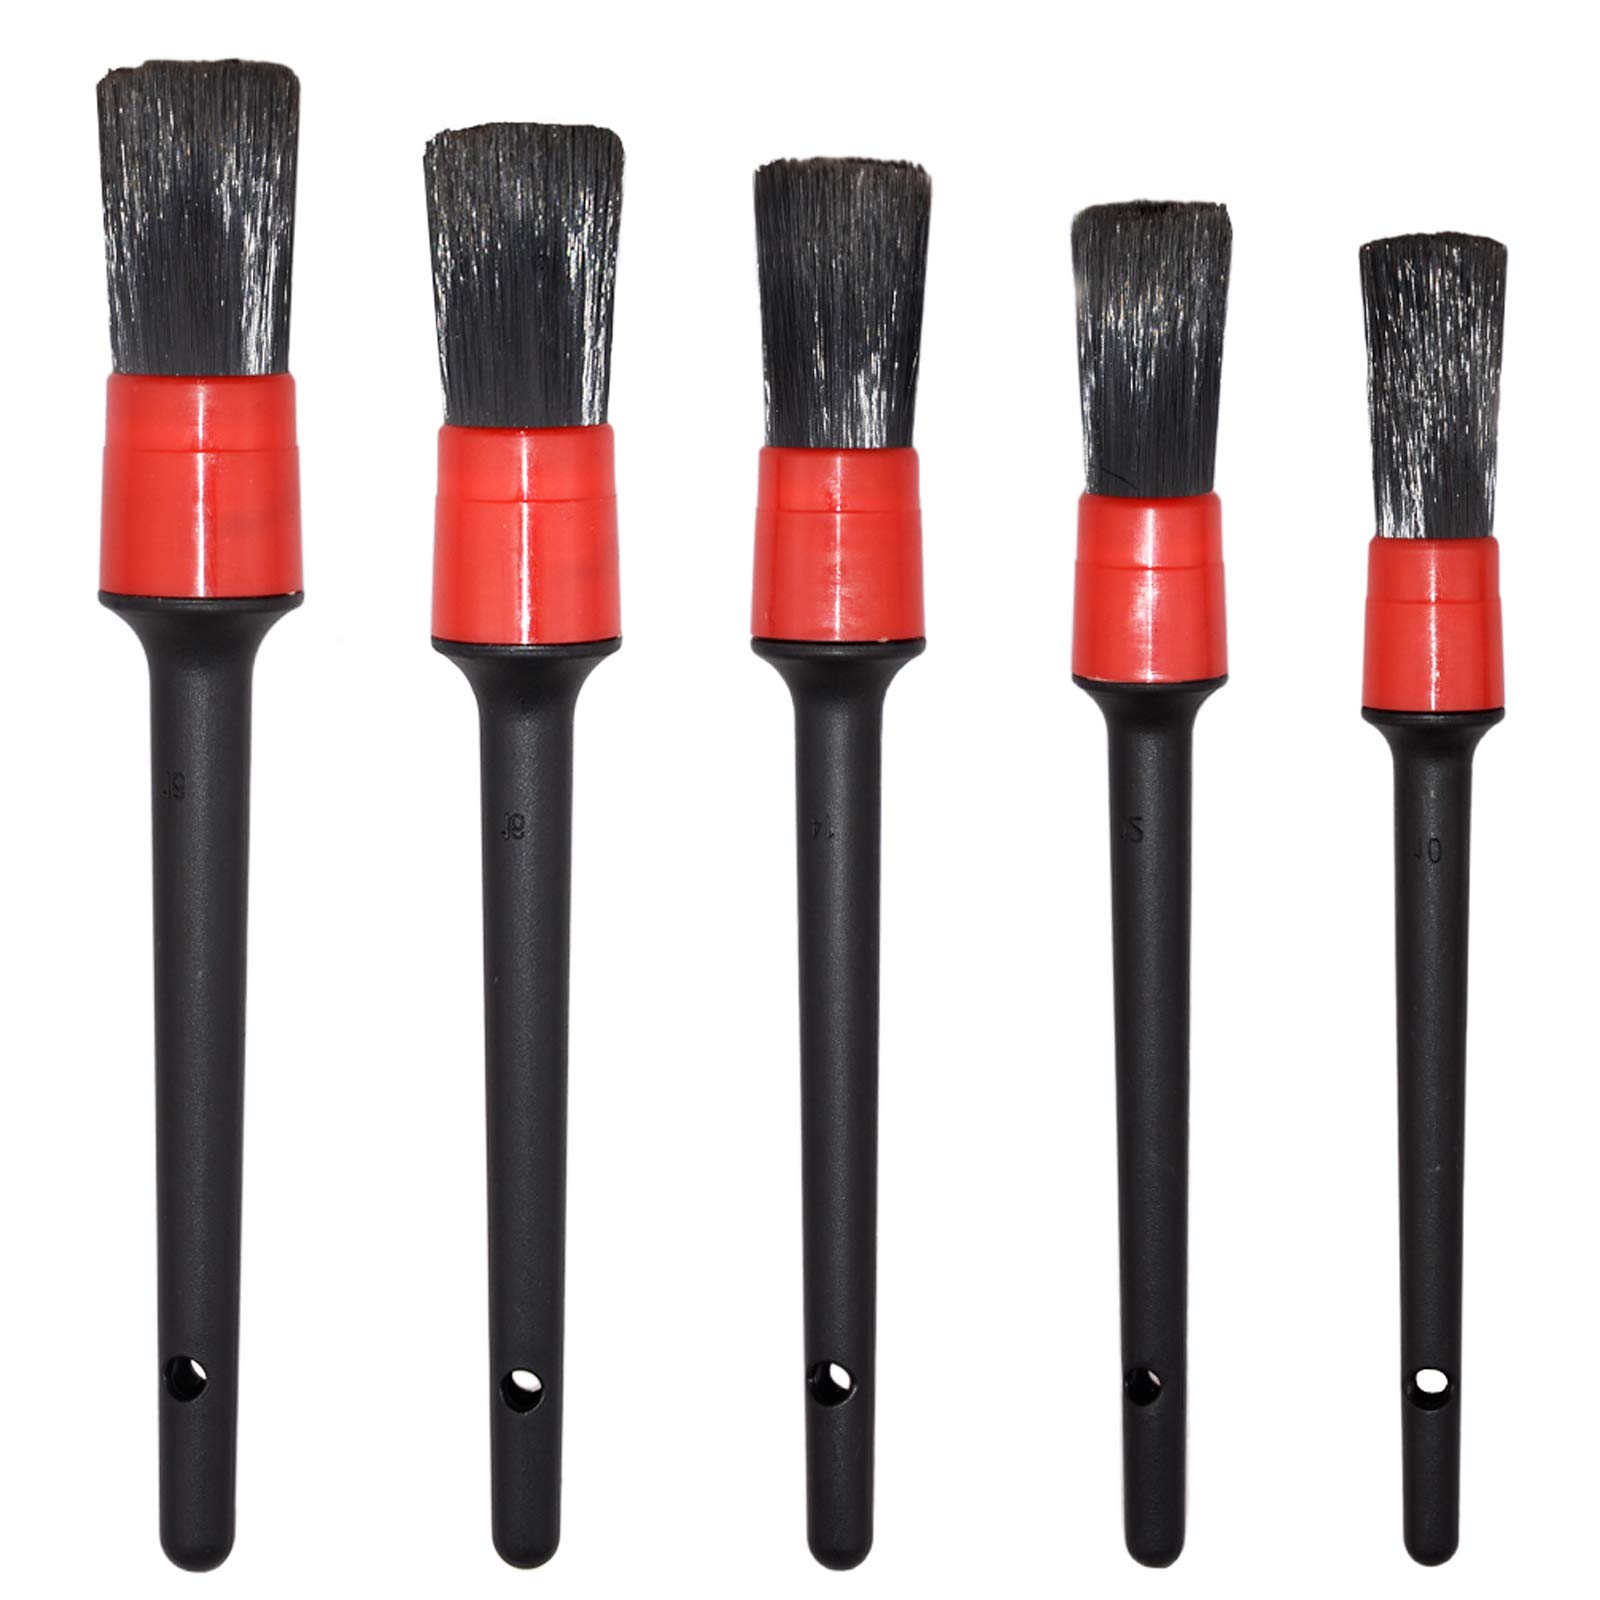 Book Cover Detailing Brush Set -5 Different Sizes Premium Natural Boar Hair Mixed Fiber Plastic Handle Automotive Detail Brushes for Cleaning Wheels, Engine, Interior, Air Vents, Car, Motorcy Red